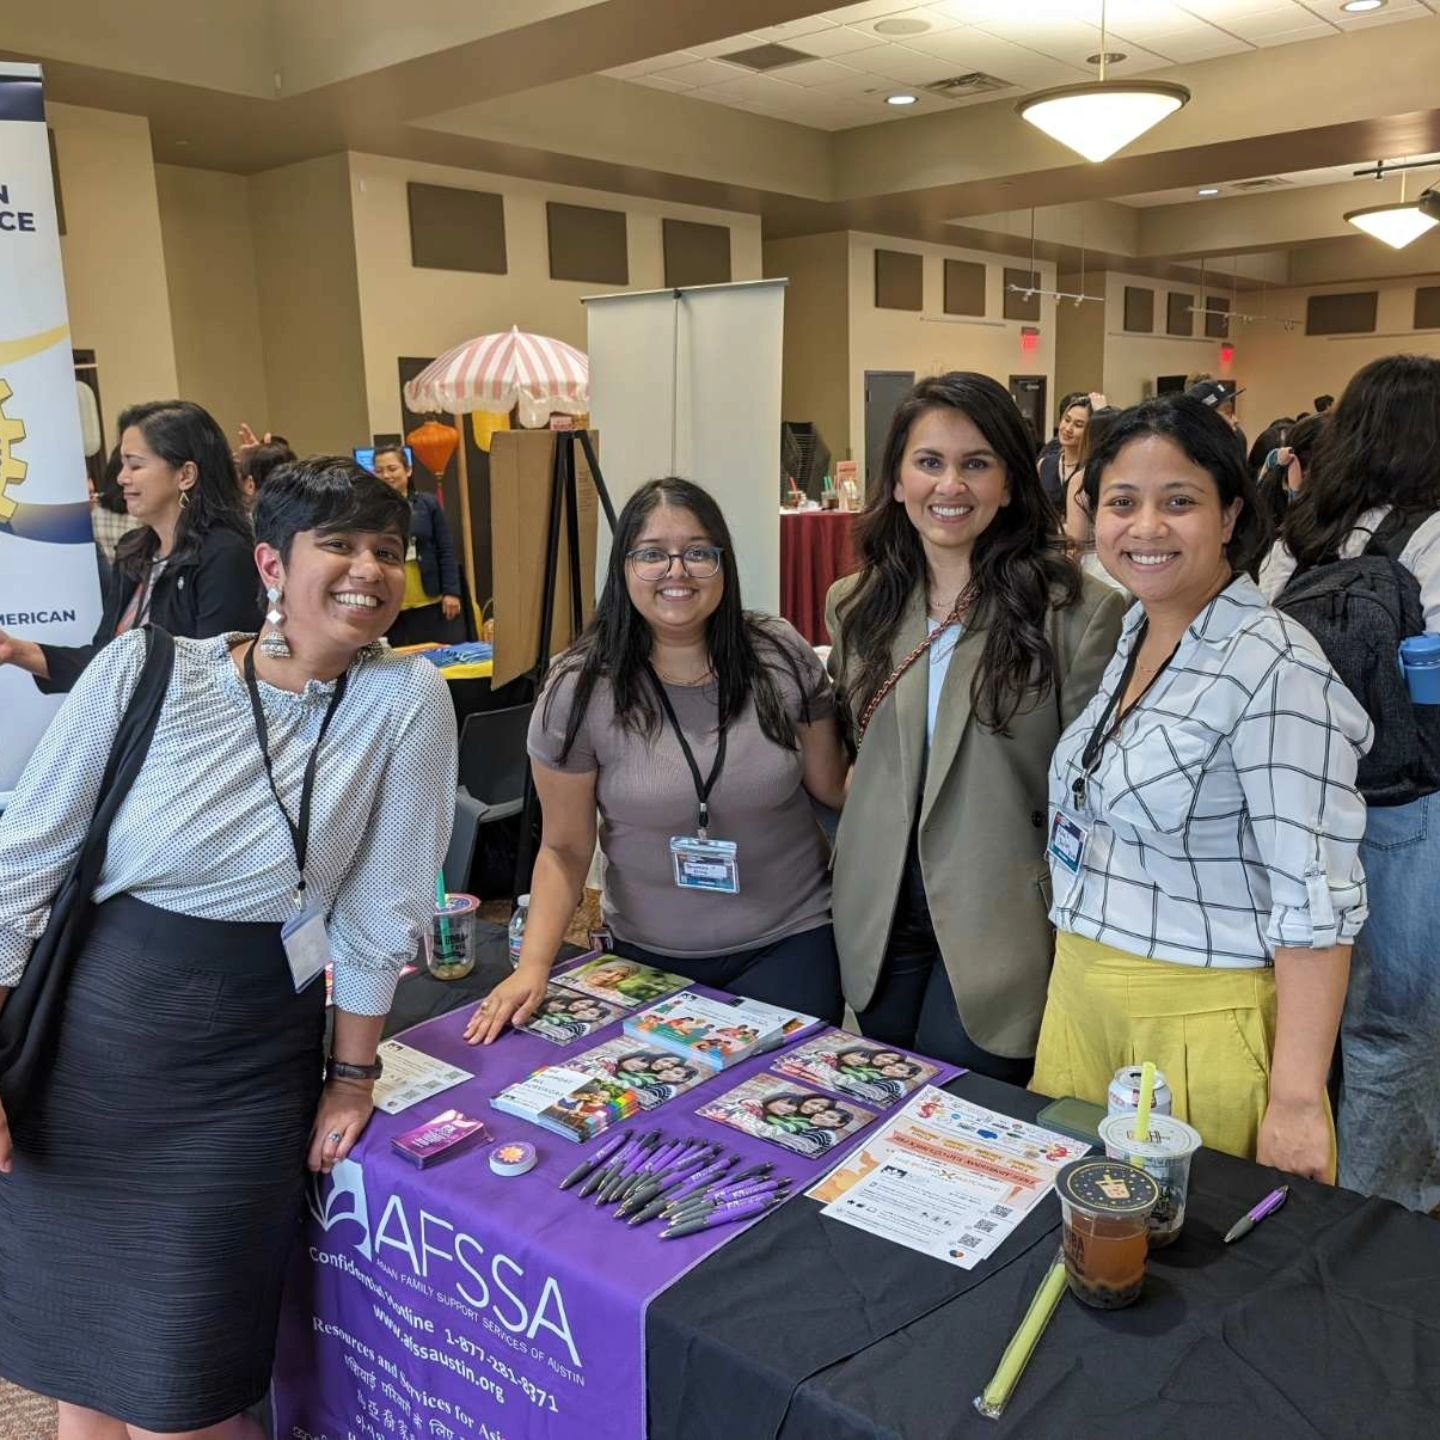 May is Asian American Pacific Islander (AAPI) Heritage Month and we are so grateful to organizations like @aarcatx and @gaaccaustin for hosting events like the Austin AAPI Professional Summit where AAPI businesses and professionals can connect with e